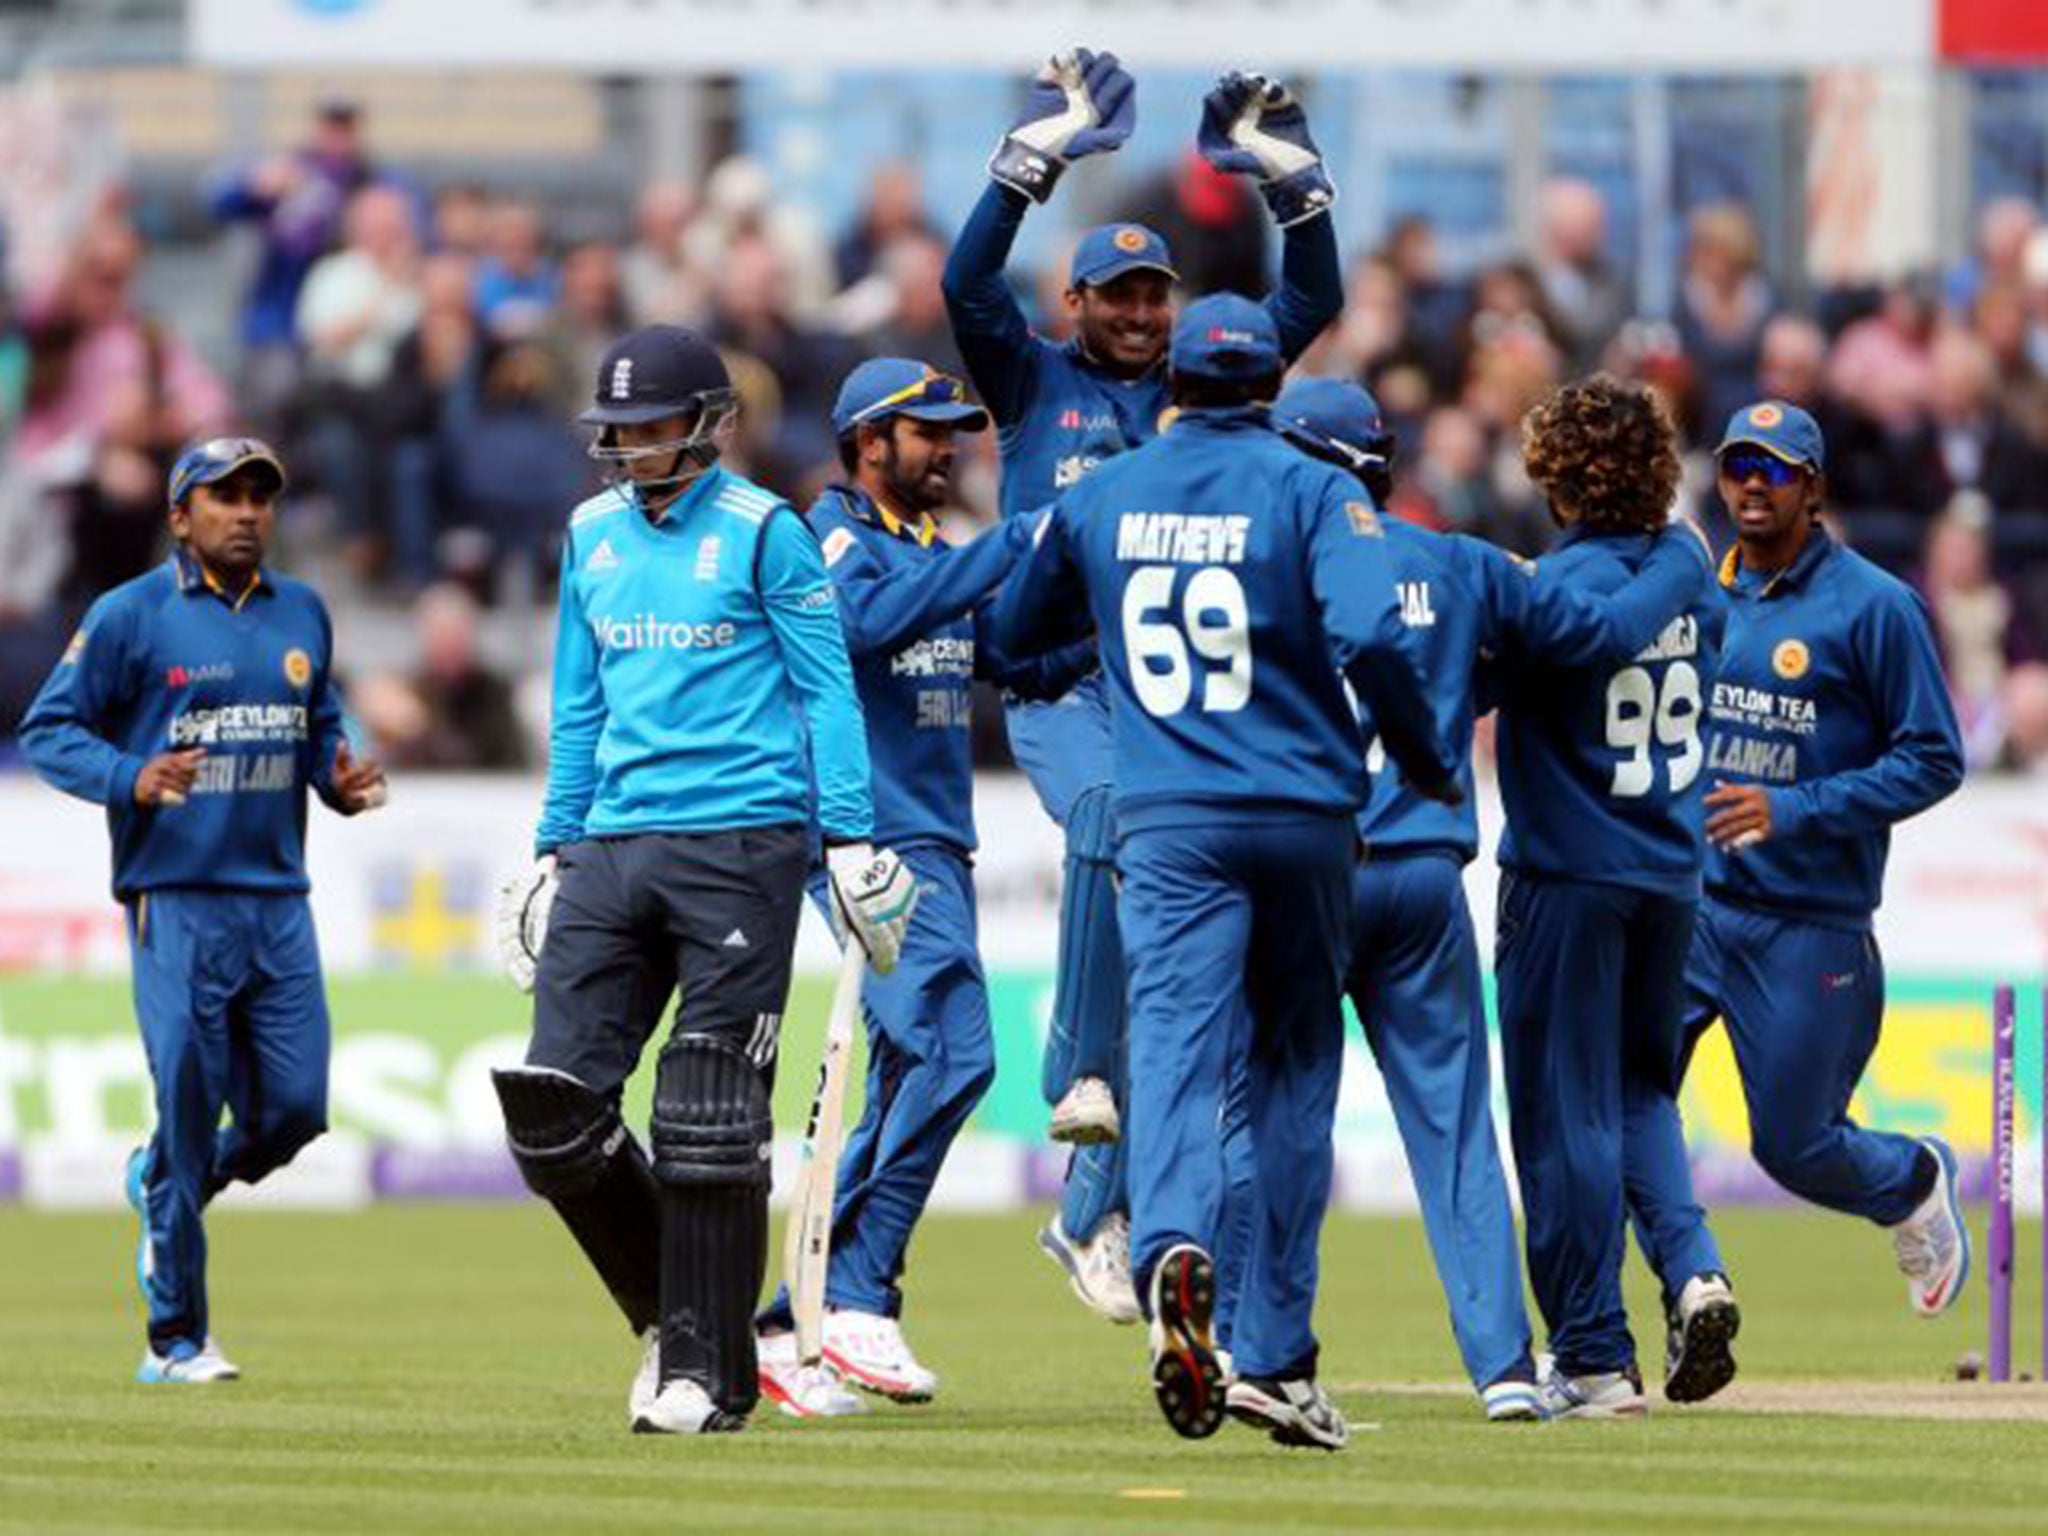 Joe Root trudges off the field after being bowled out by Lasith Malinga for a duck